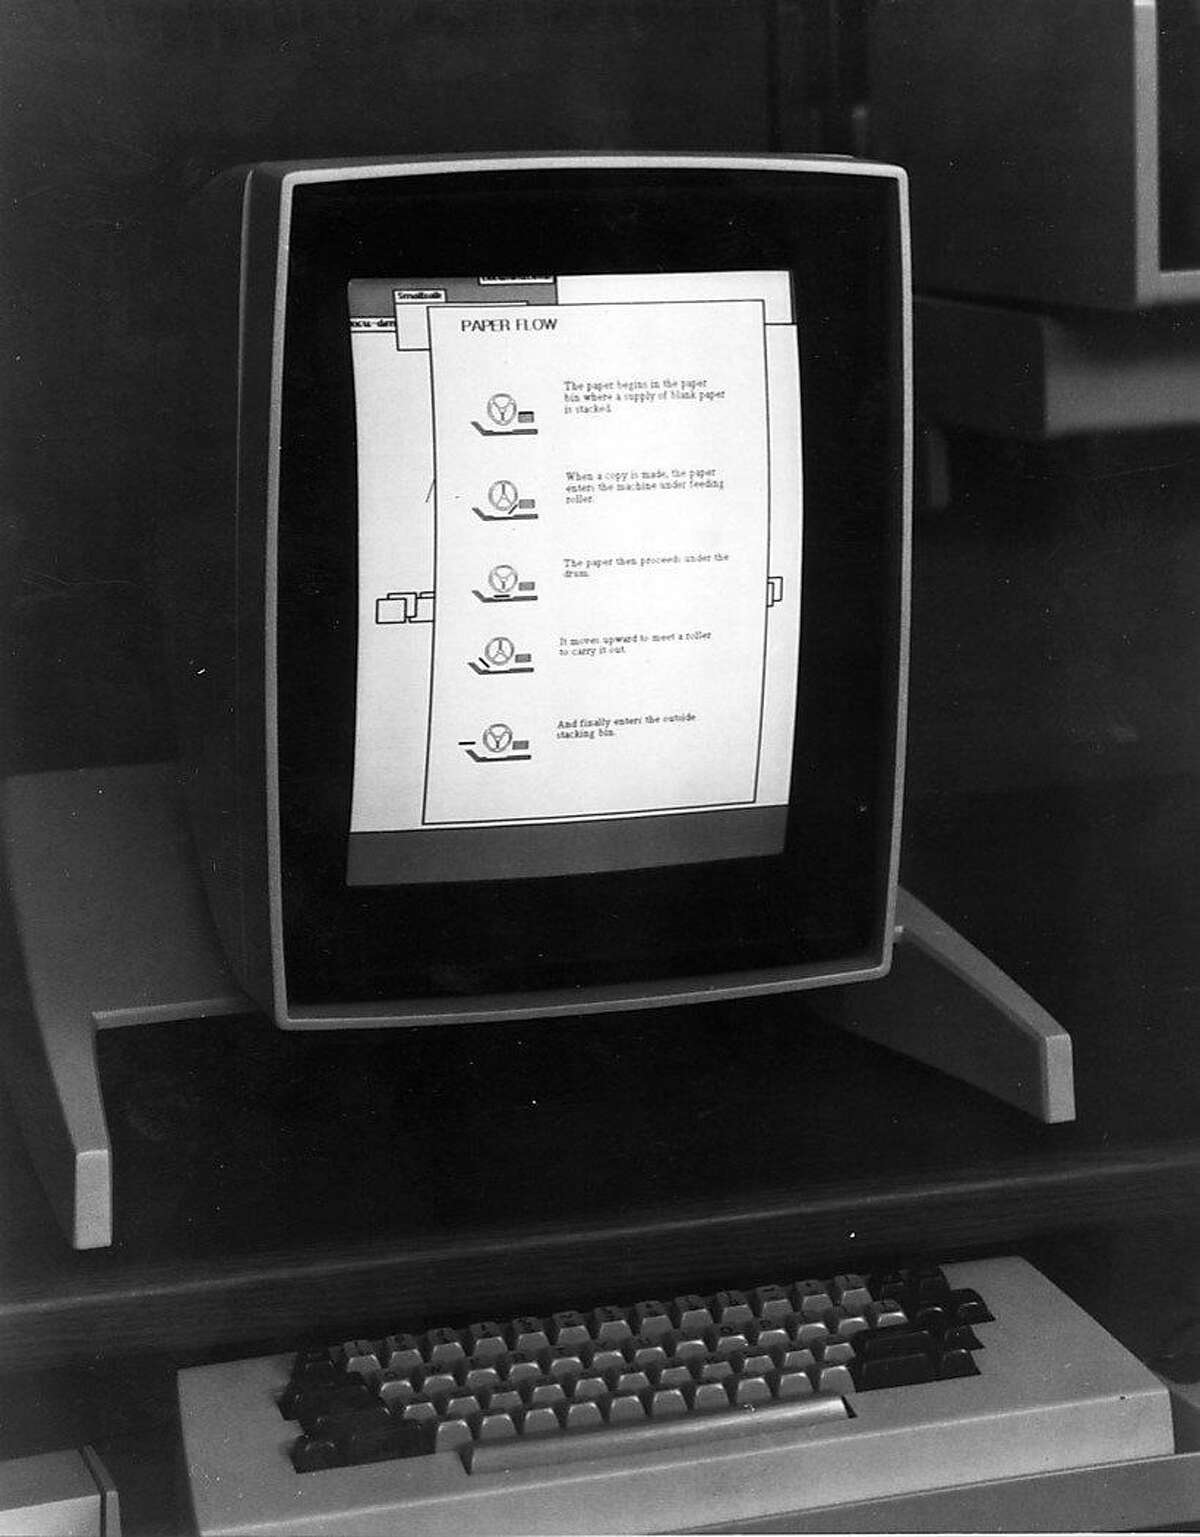 The Alto, left, was the world's first personal computer, developed with a graphical user interface in 1973 -- although this version is the one from 1975. It is one of many projects from the Xerox Palo Alto Research Center.